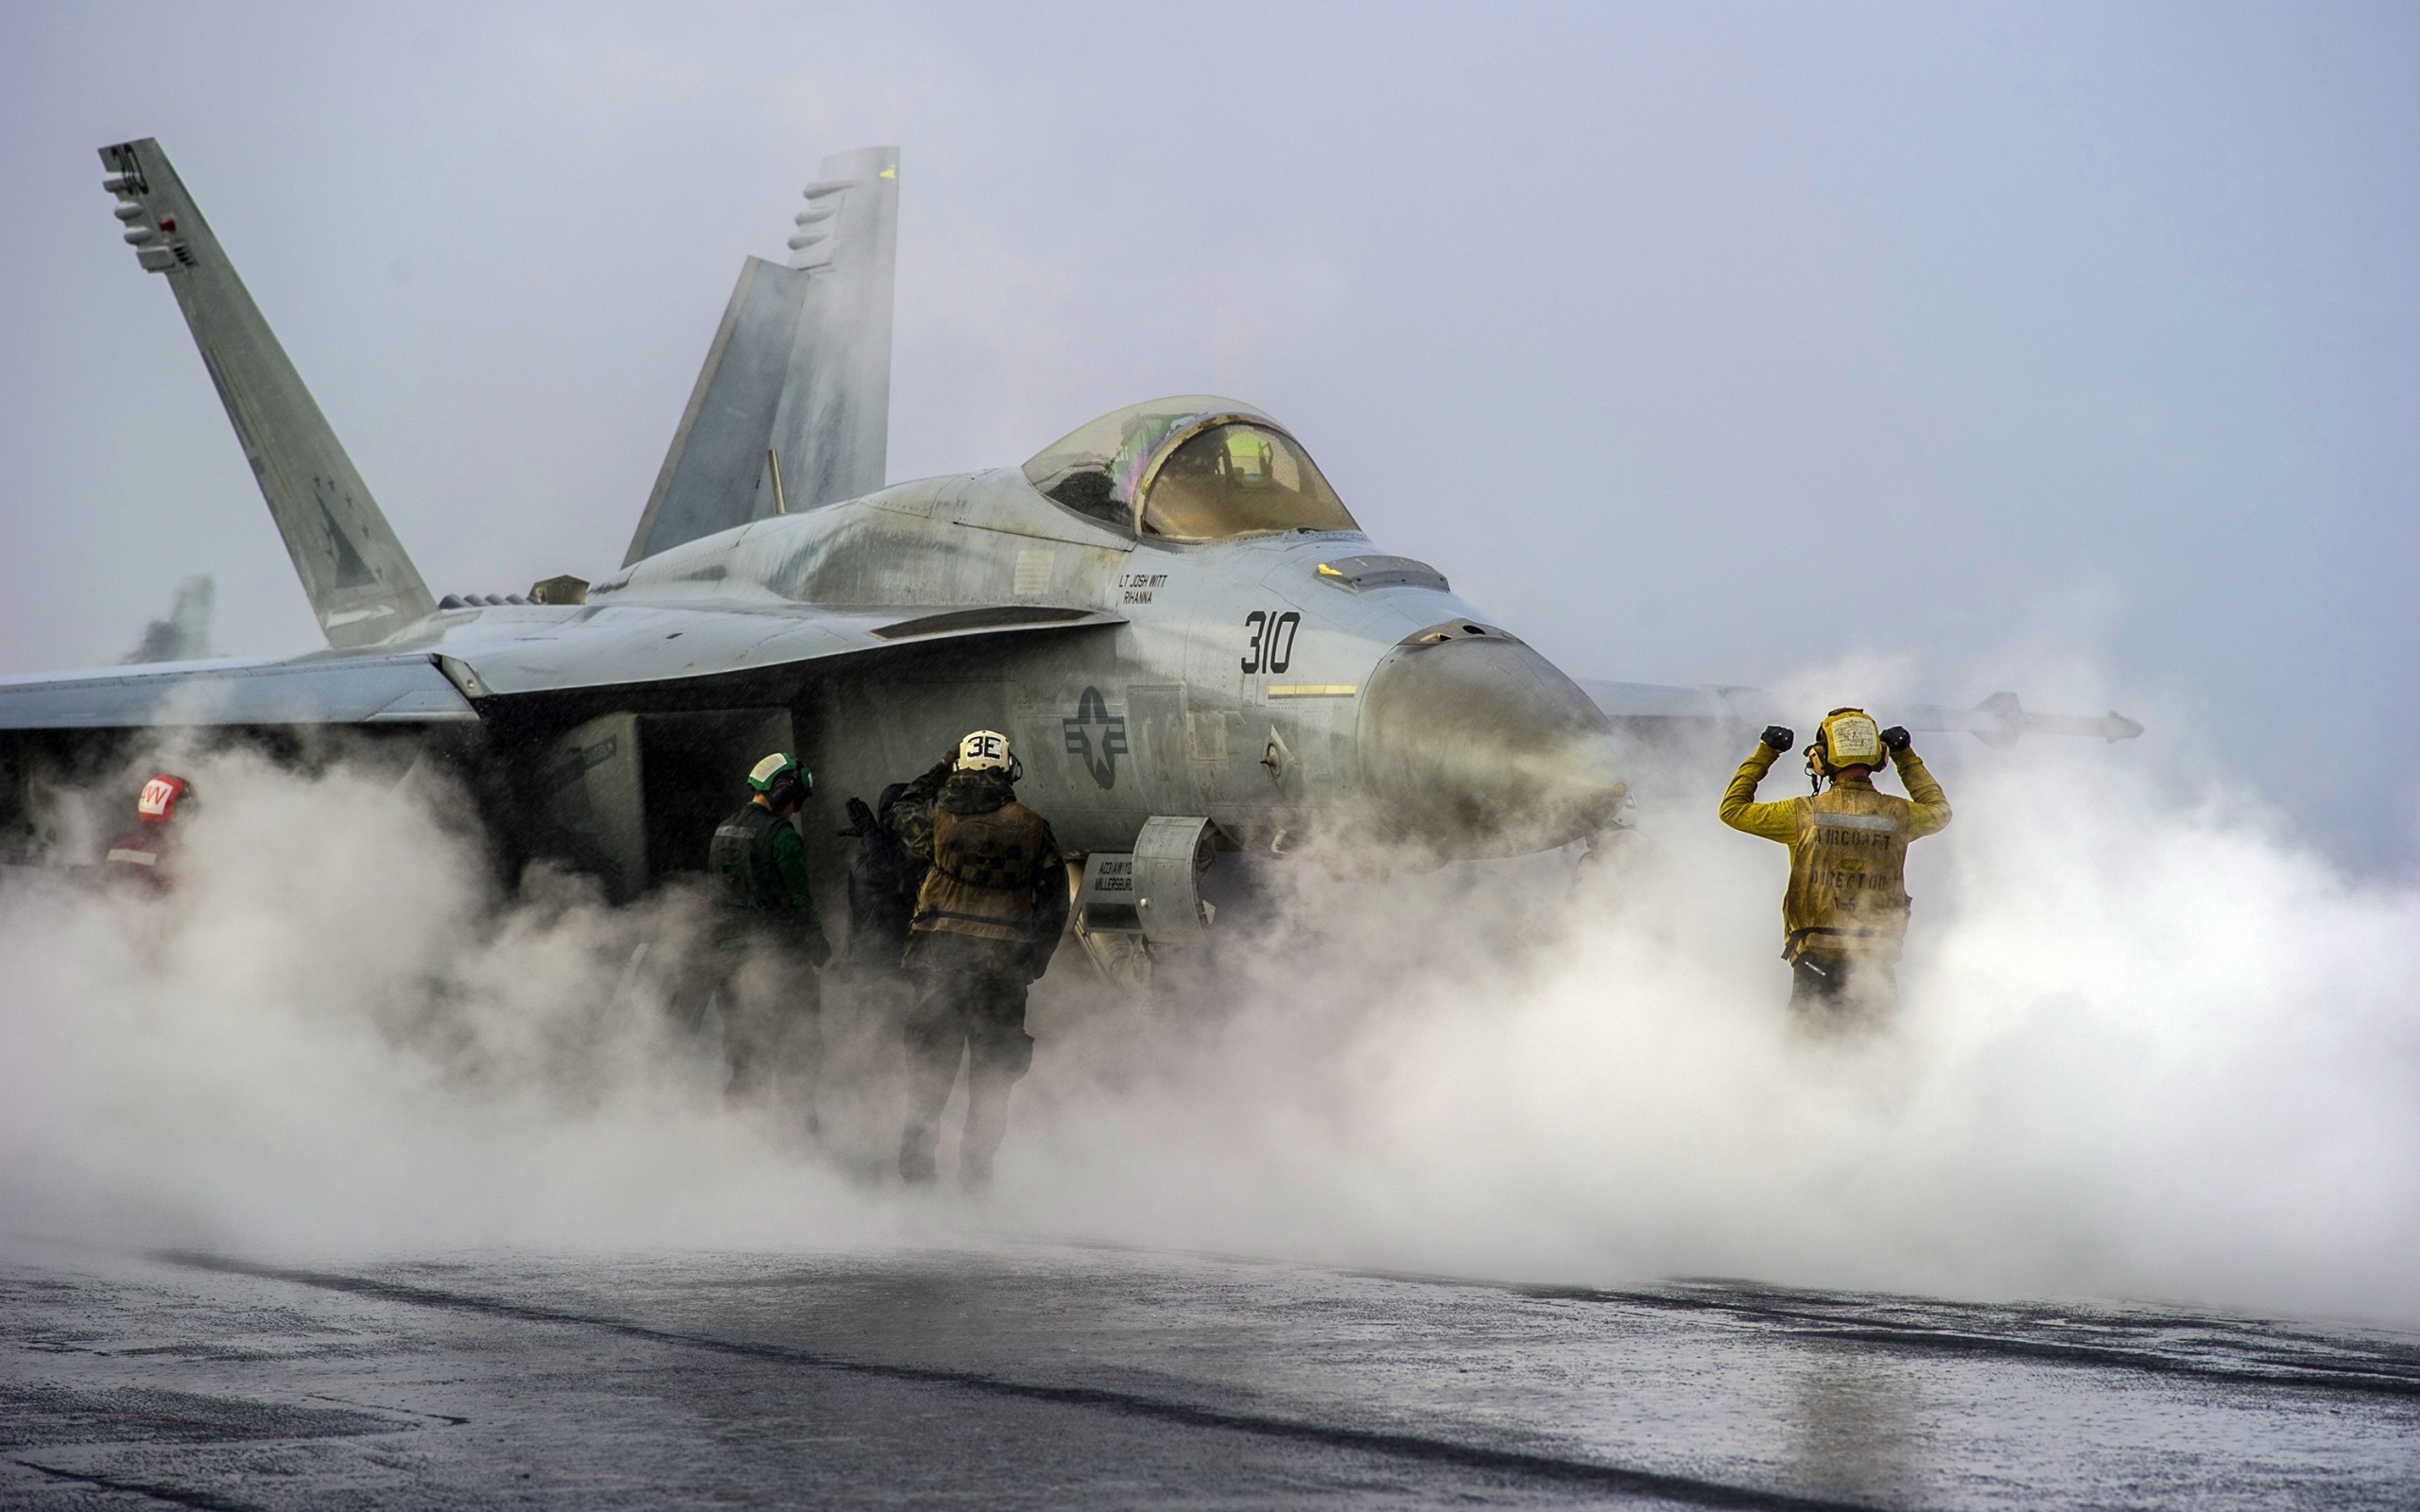 2560x1600 2560x1440 HD wallpaper of an F/A-18 Super Hornet preparing for takeoff from  an aircraft carrier. A  version of this wallpaper can be found at  ...